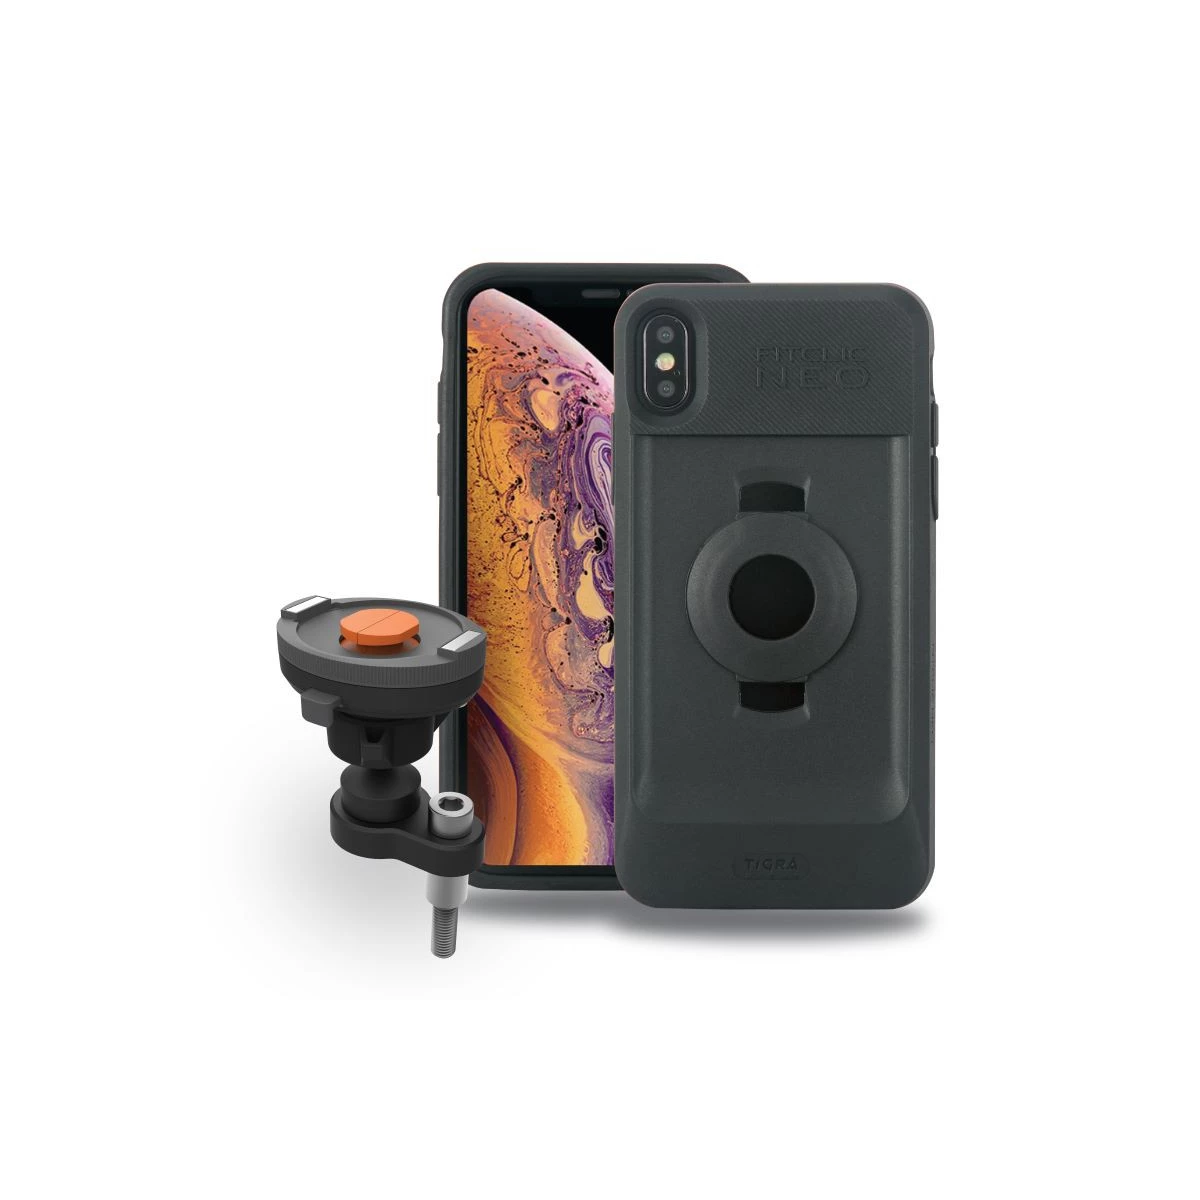 Tigra Sport - FitClic Neo Motorcycle Pin Mount Kit for iPhone XS MAX